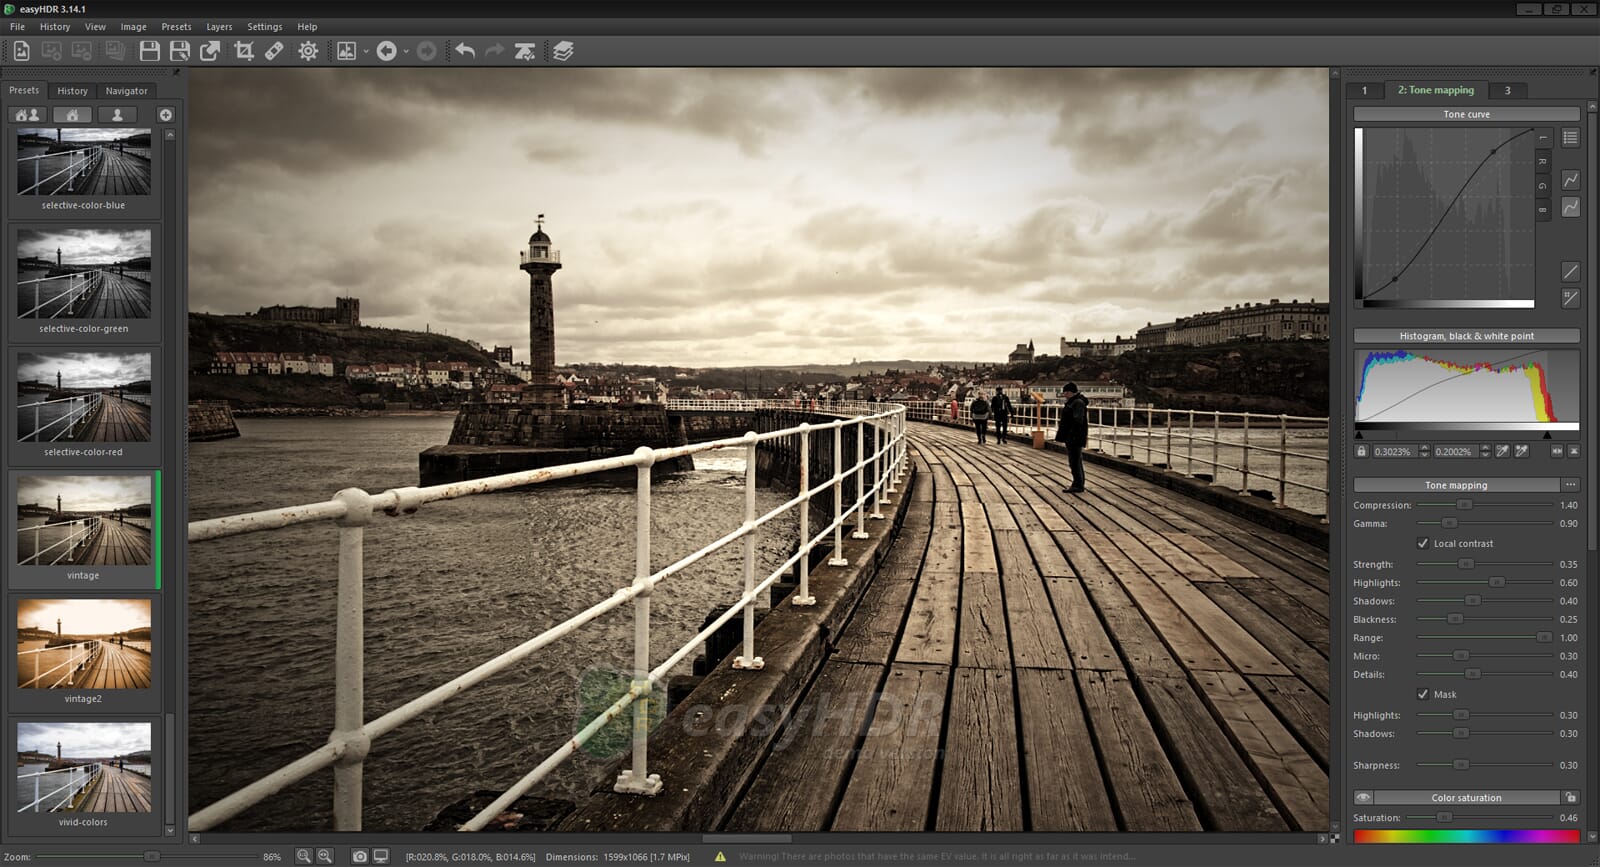 using easyhdr with single image